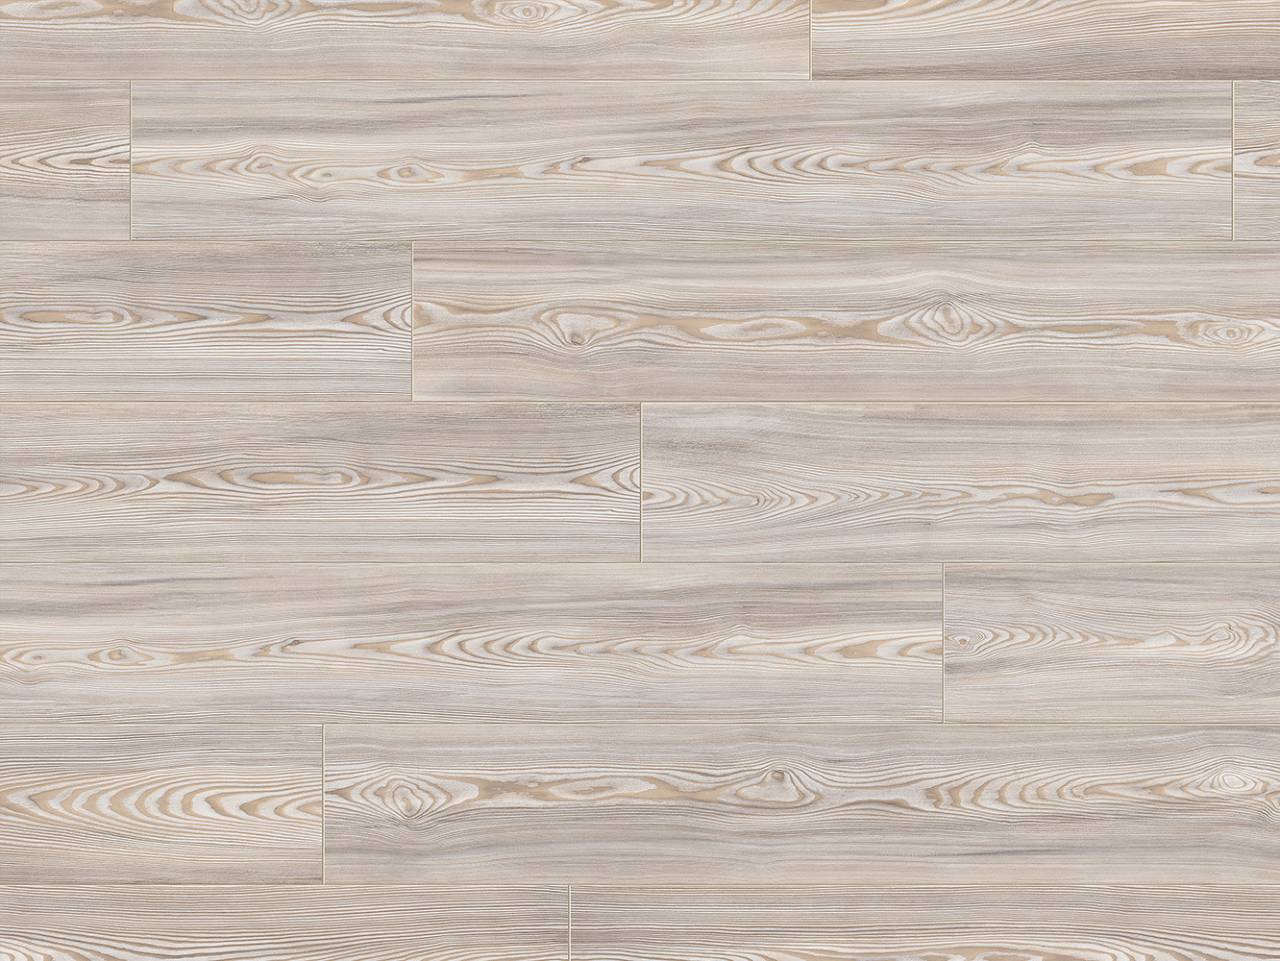 Close-up of K473 Pearl Scandi Larch sample, featuring light pearlescent tones and delicate wood grain patterns.